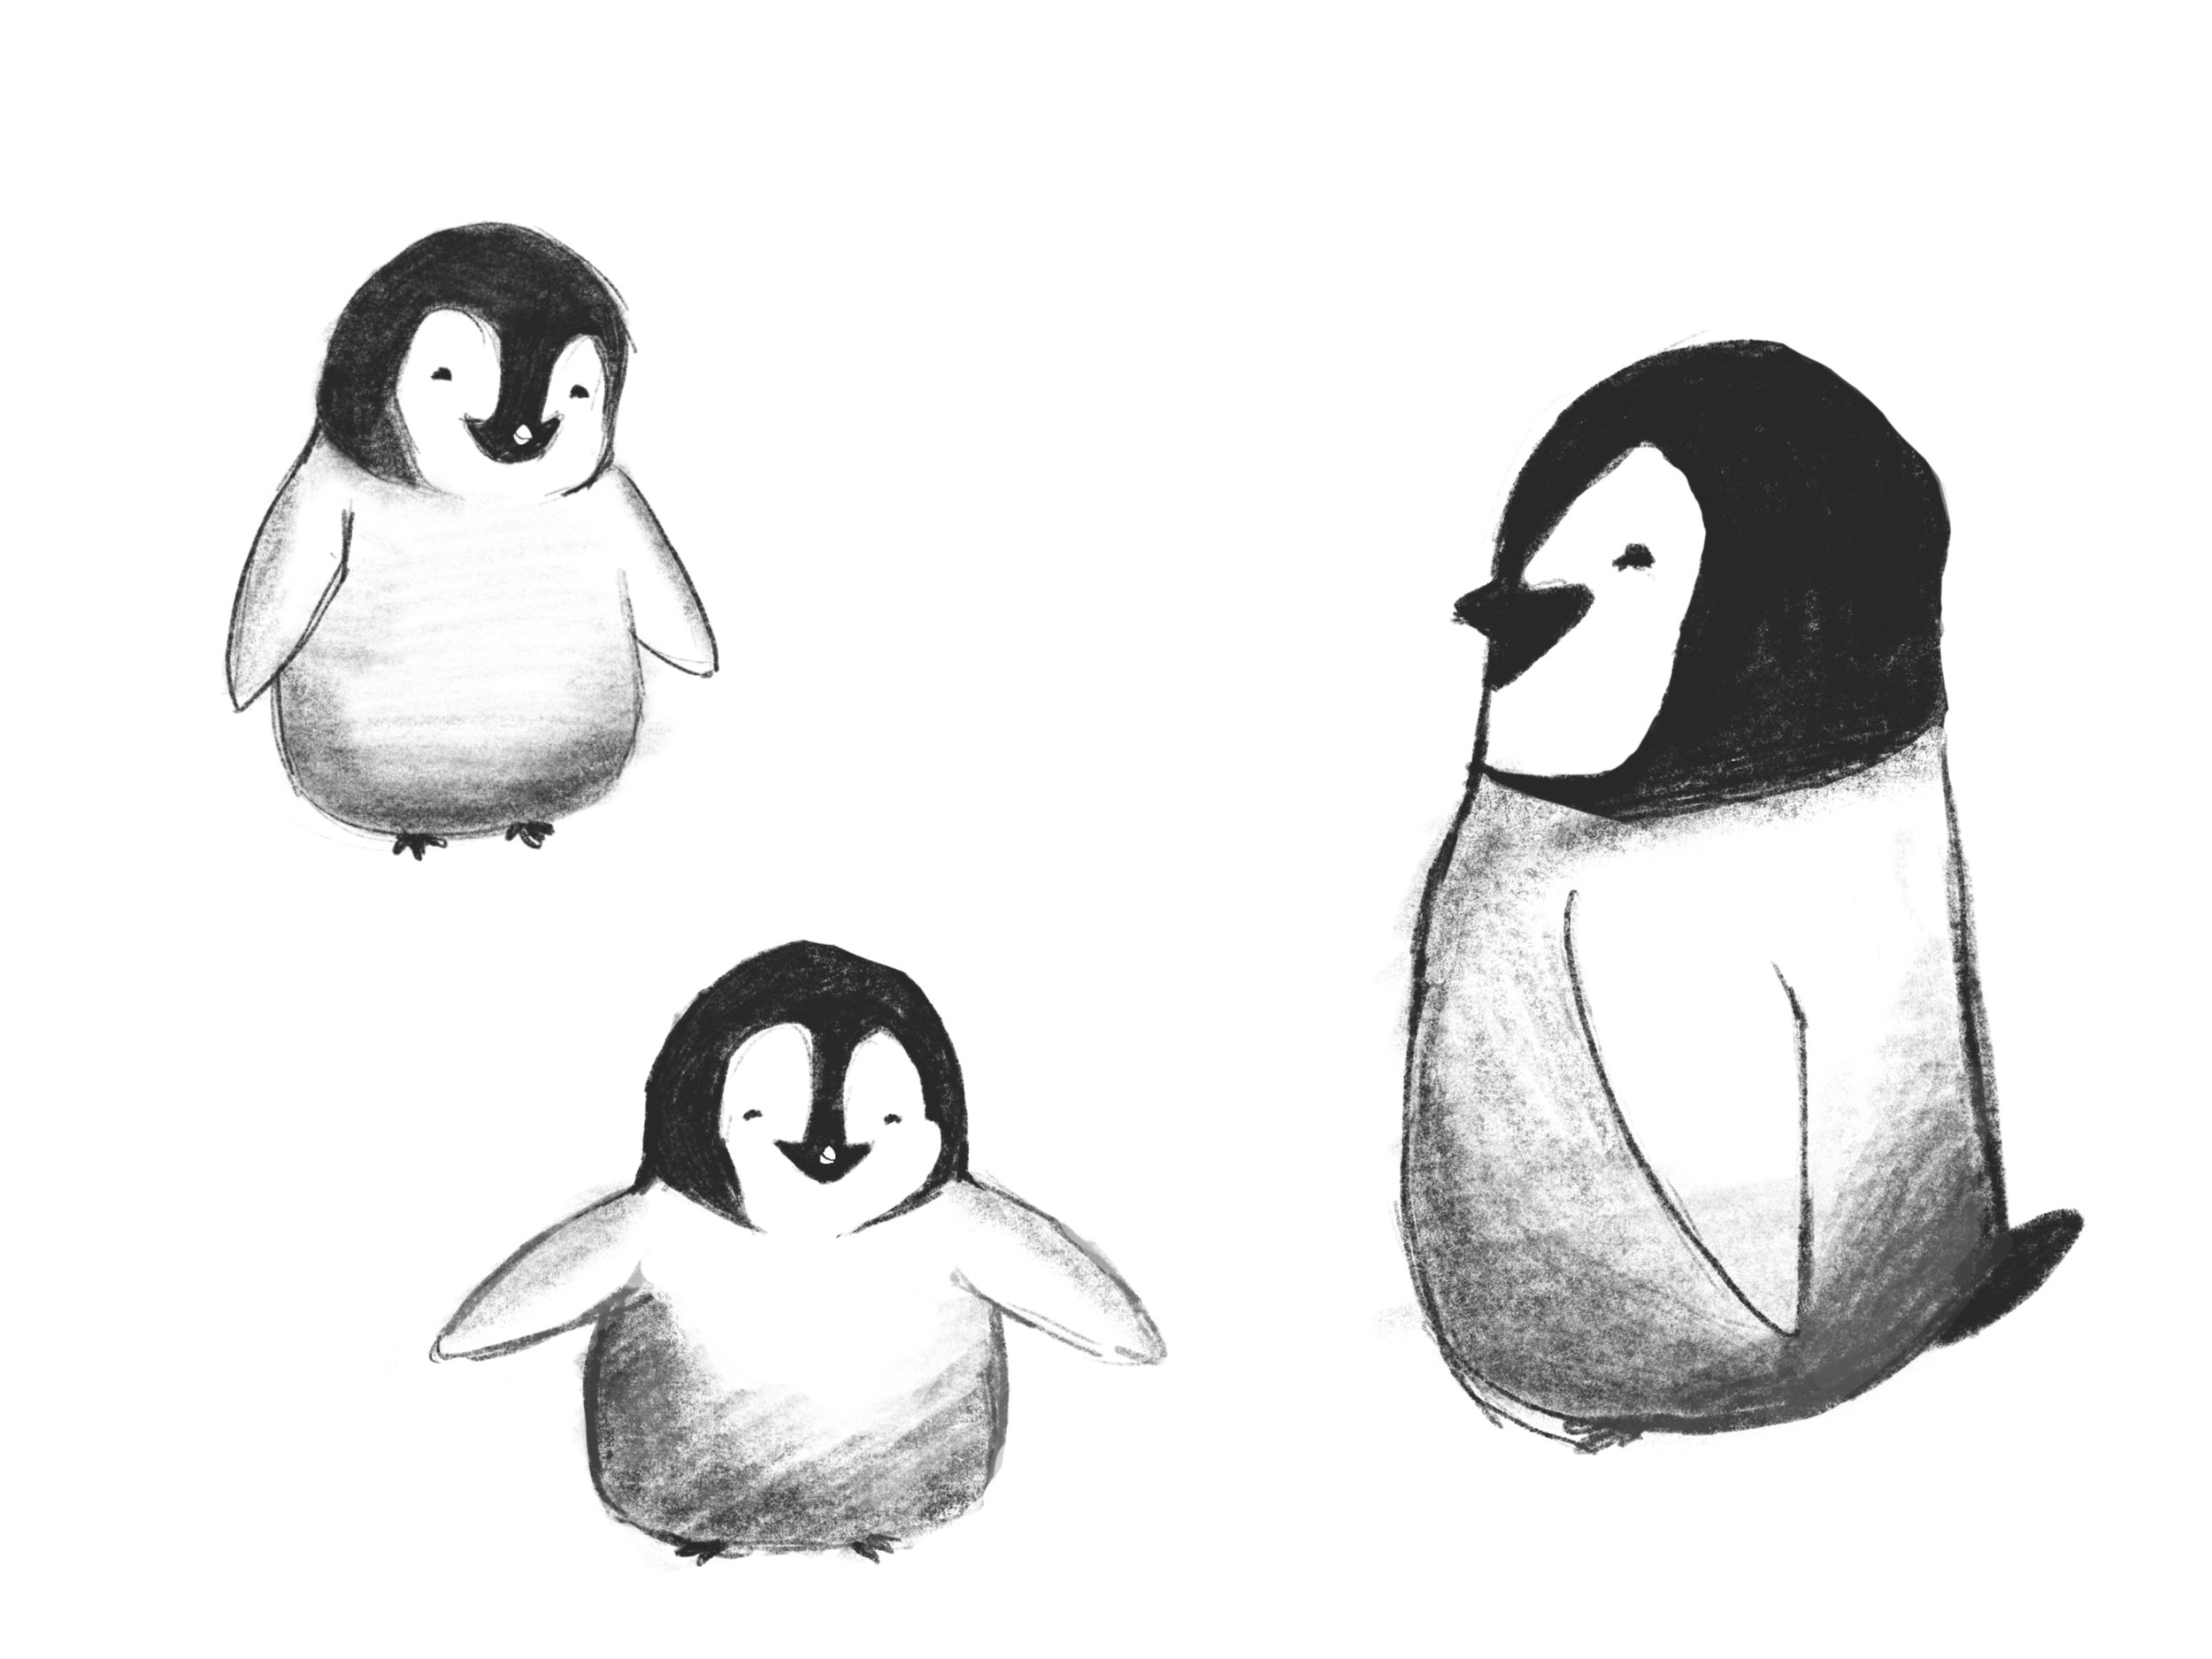 How to make a poster article. Image of penguins drawings